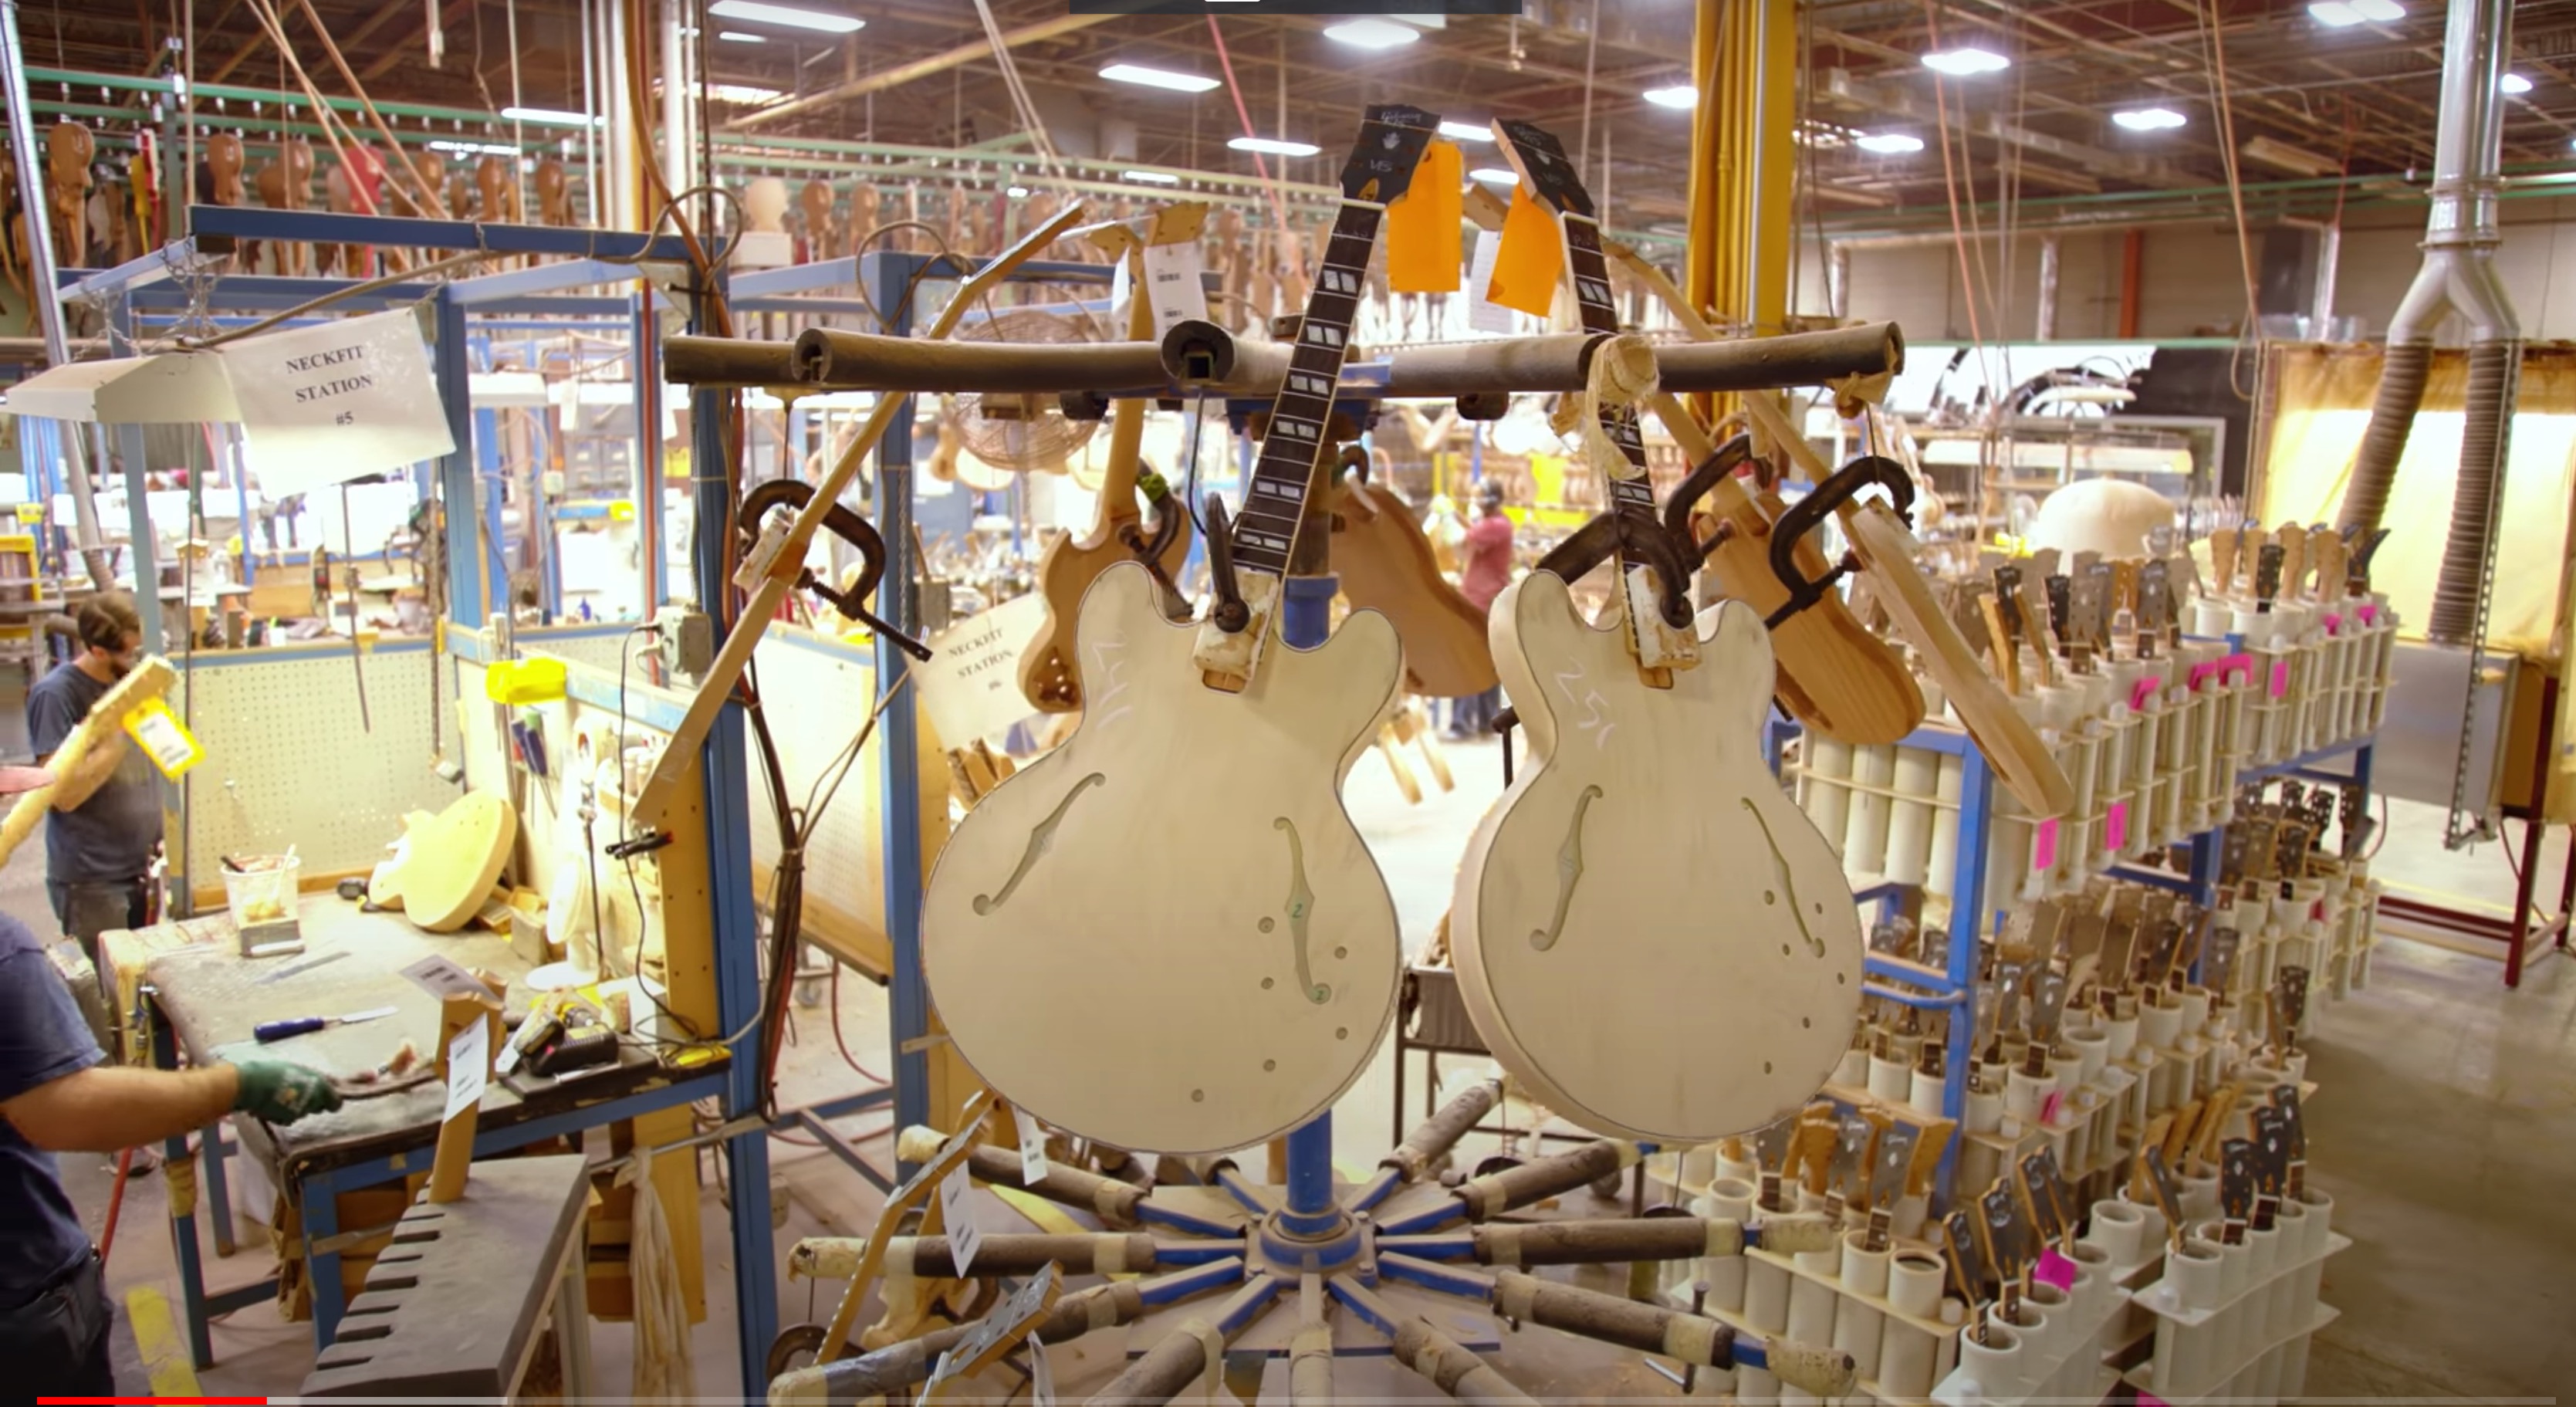 Gibson TV Takes You Behind The Scenes Of Guitar Building In Award-Winning Series“The Process”